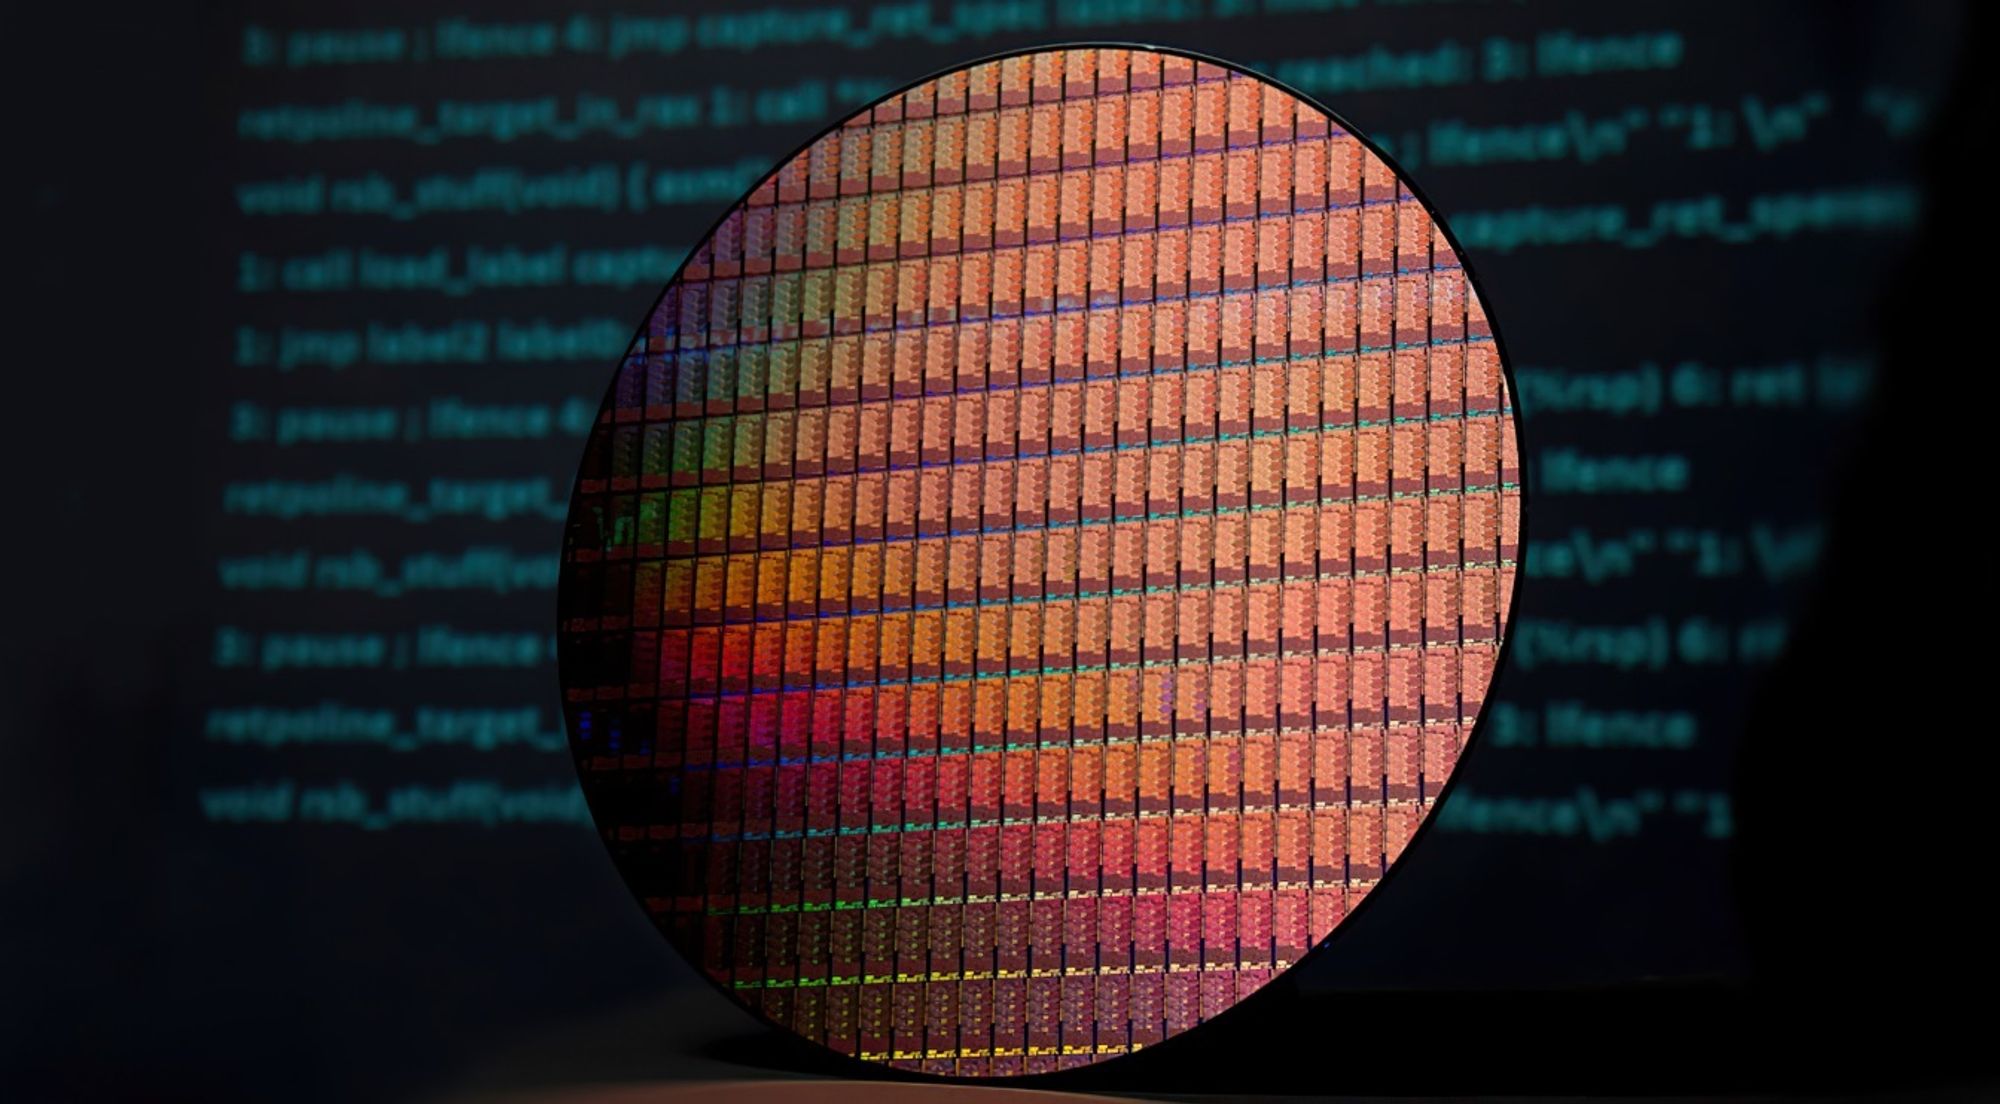 New 'Morpheus' CPU Design Defeats Hundreds of Hackers in DARPA Tests - ExtremeTech